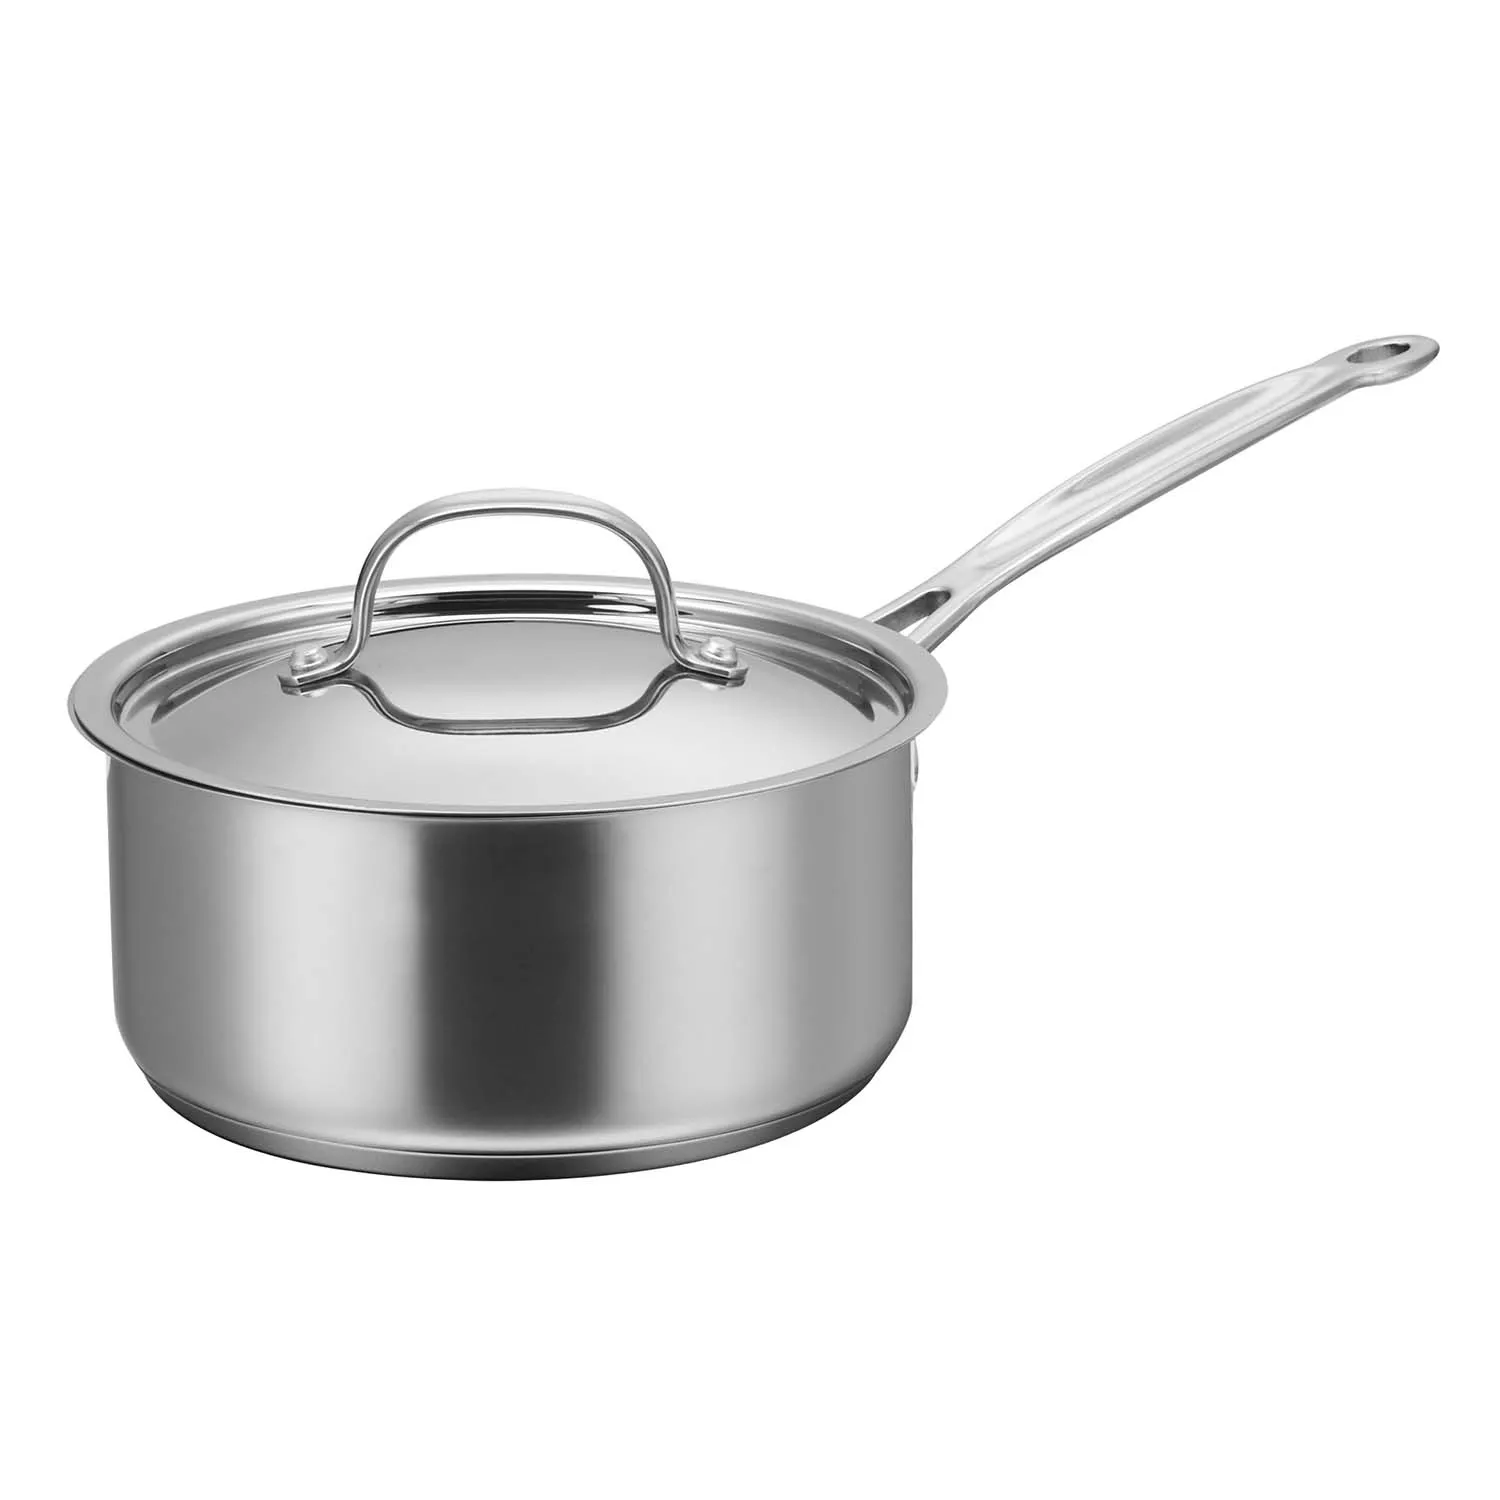 Cuisinart Sauce Pan with Lid by Cuisinart, 3 Quart Chef's Pan, Stainless  Steel, 8335-24